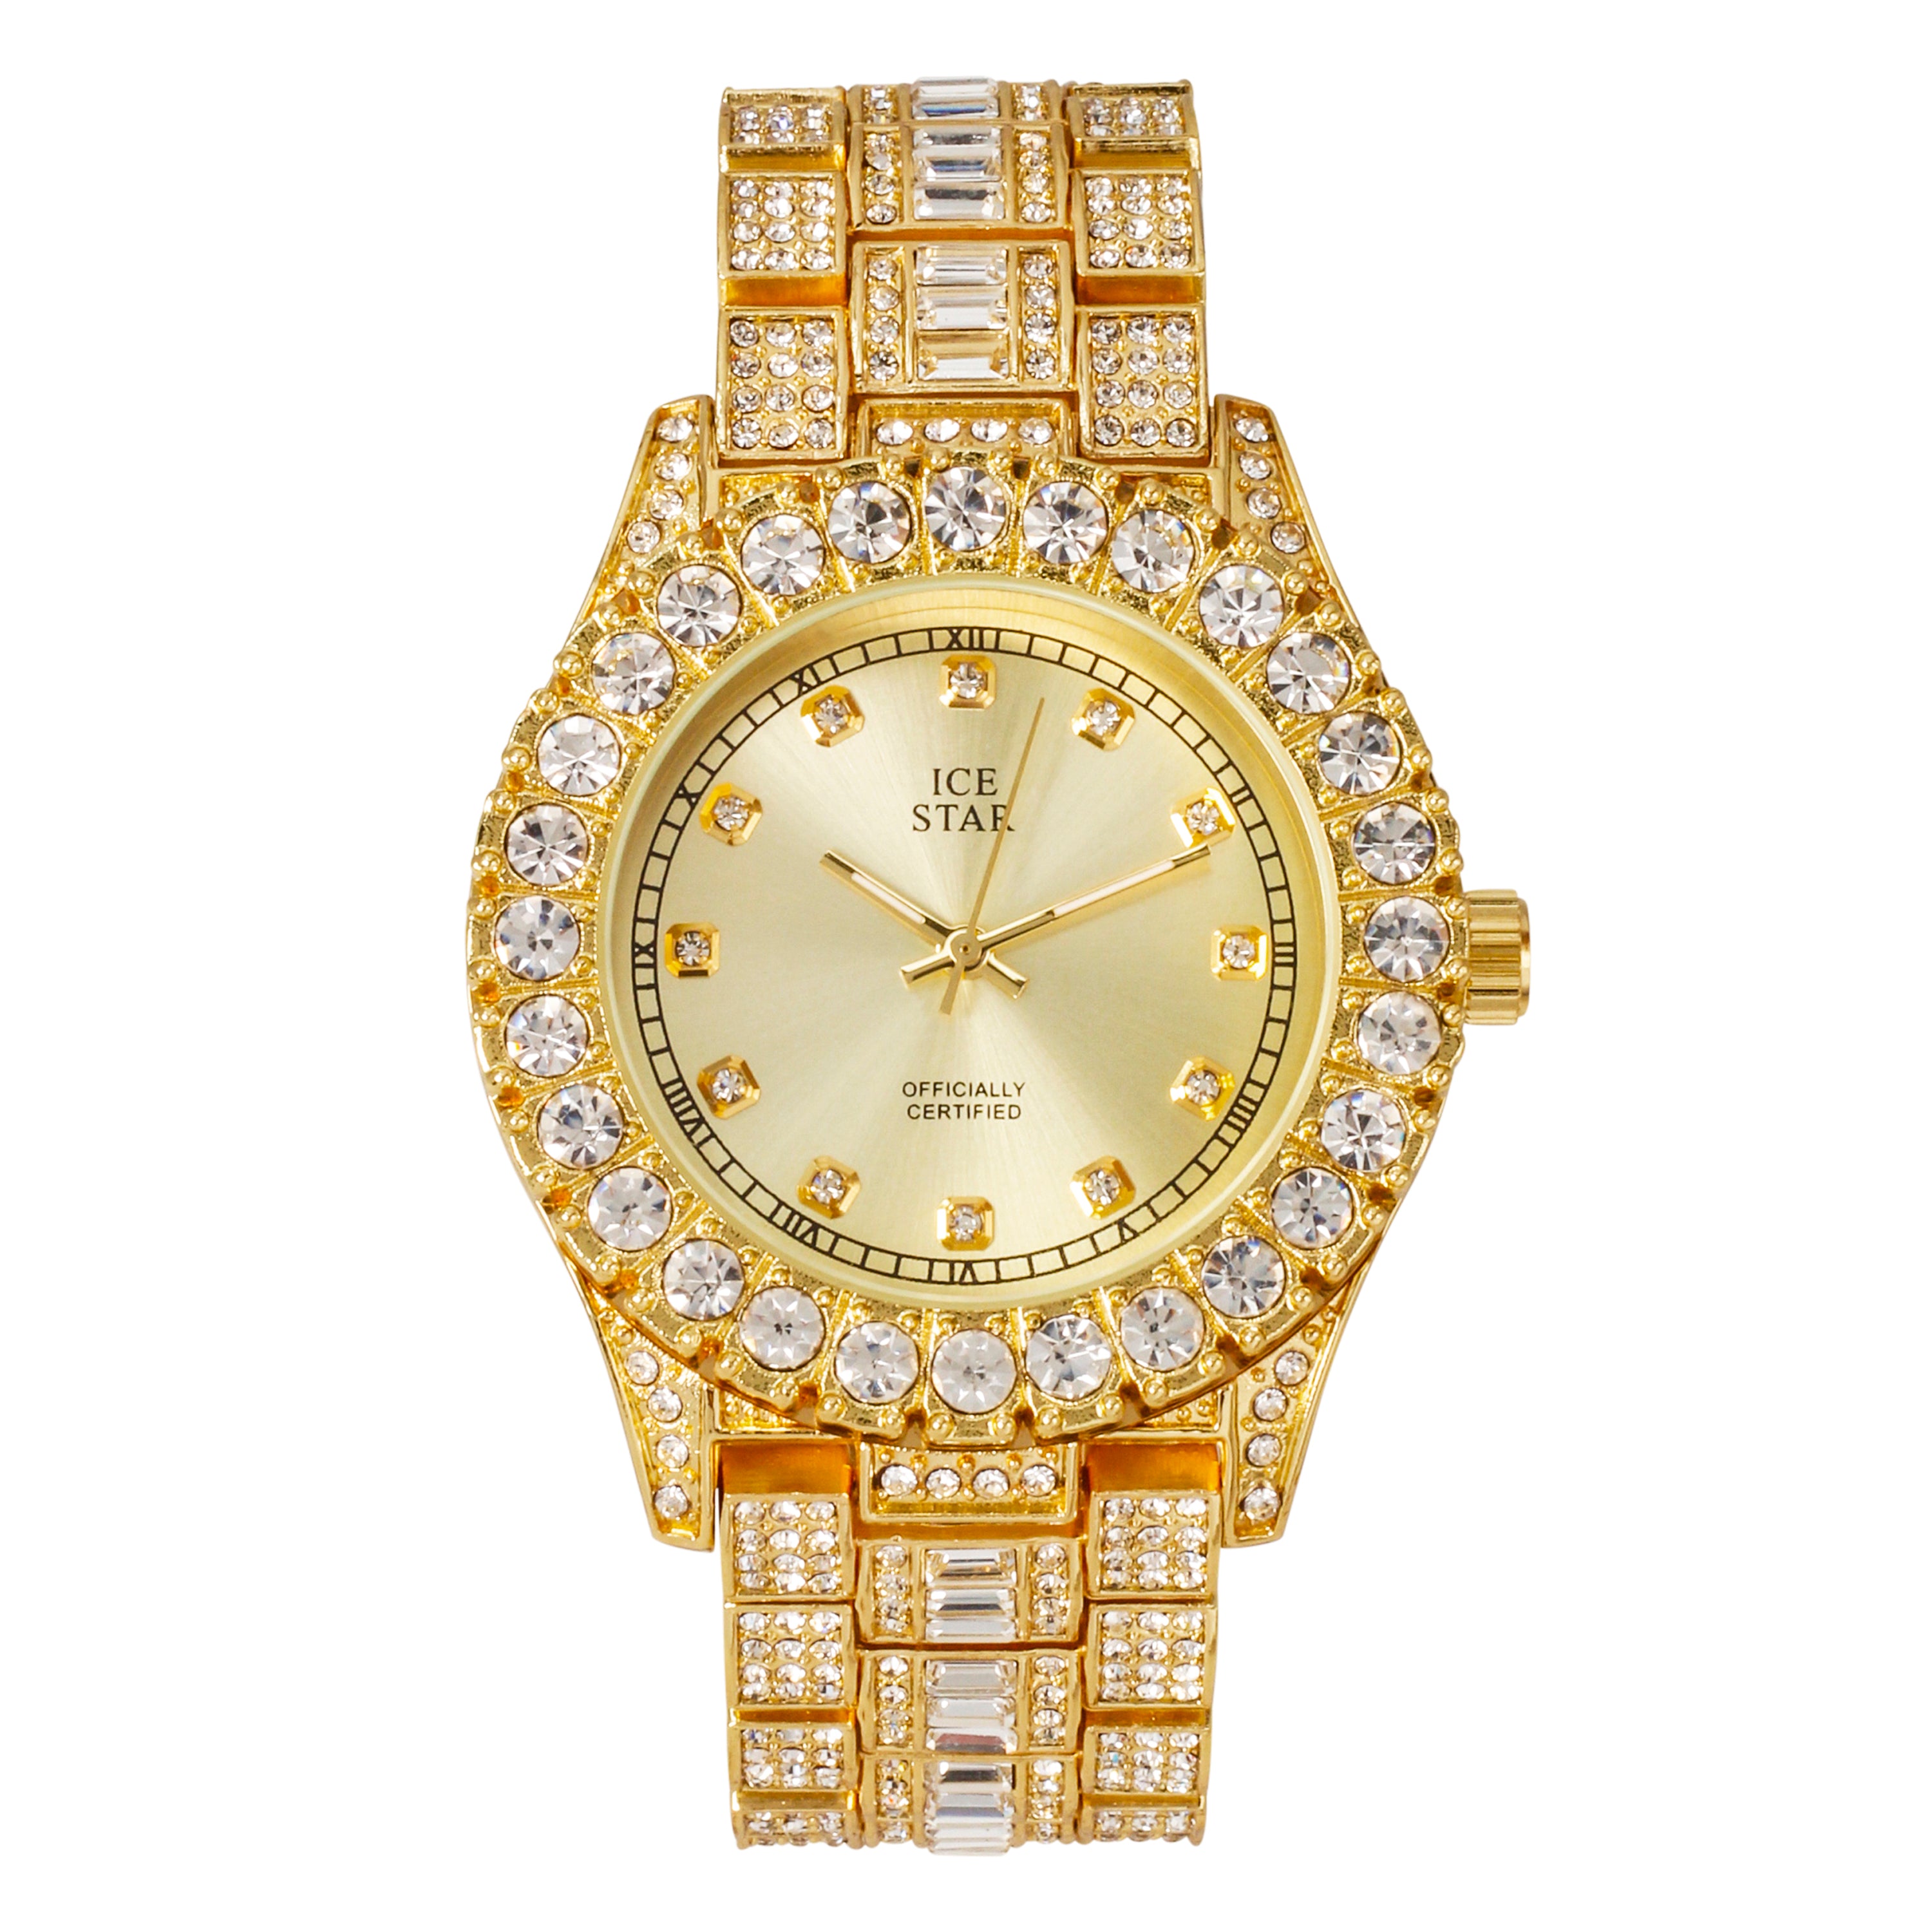 Men's Round Iced Out Watch 40mm Gold - "Fully Iced Band"